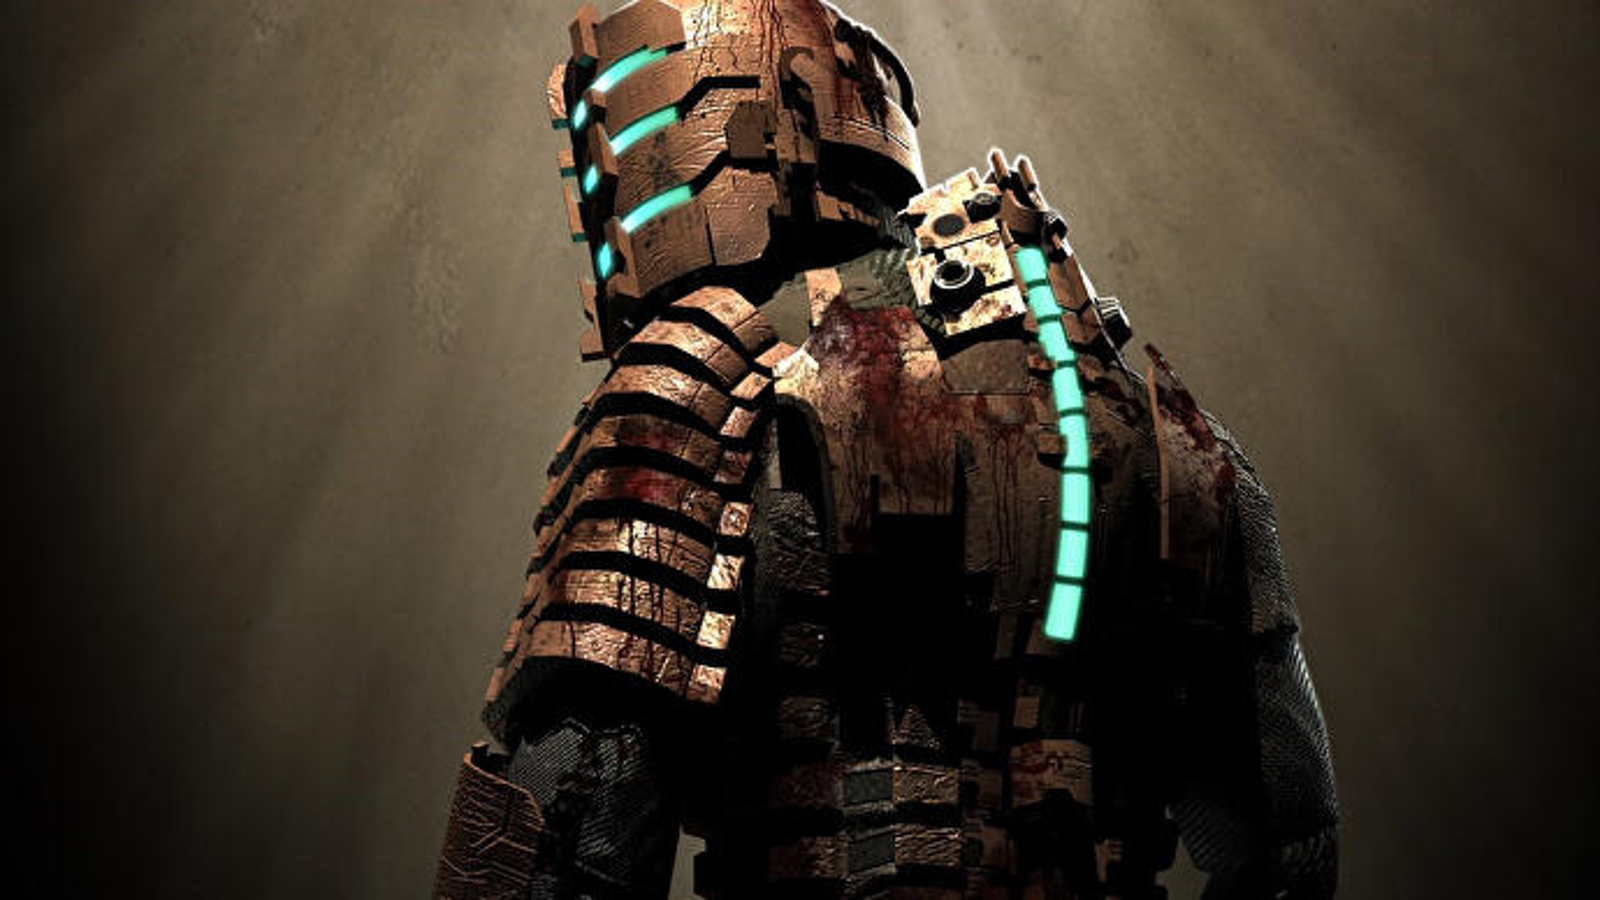 Dead Space writer's next game will be unveiled this week for PS5